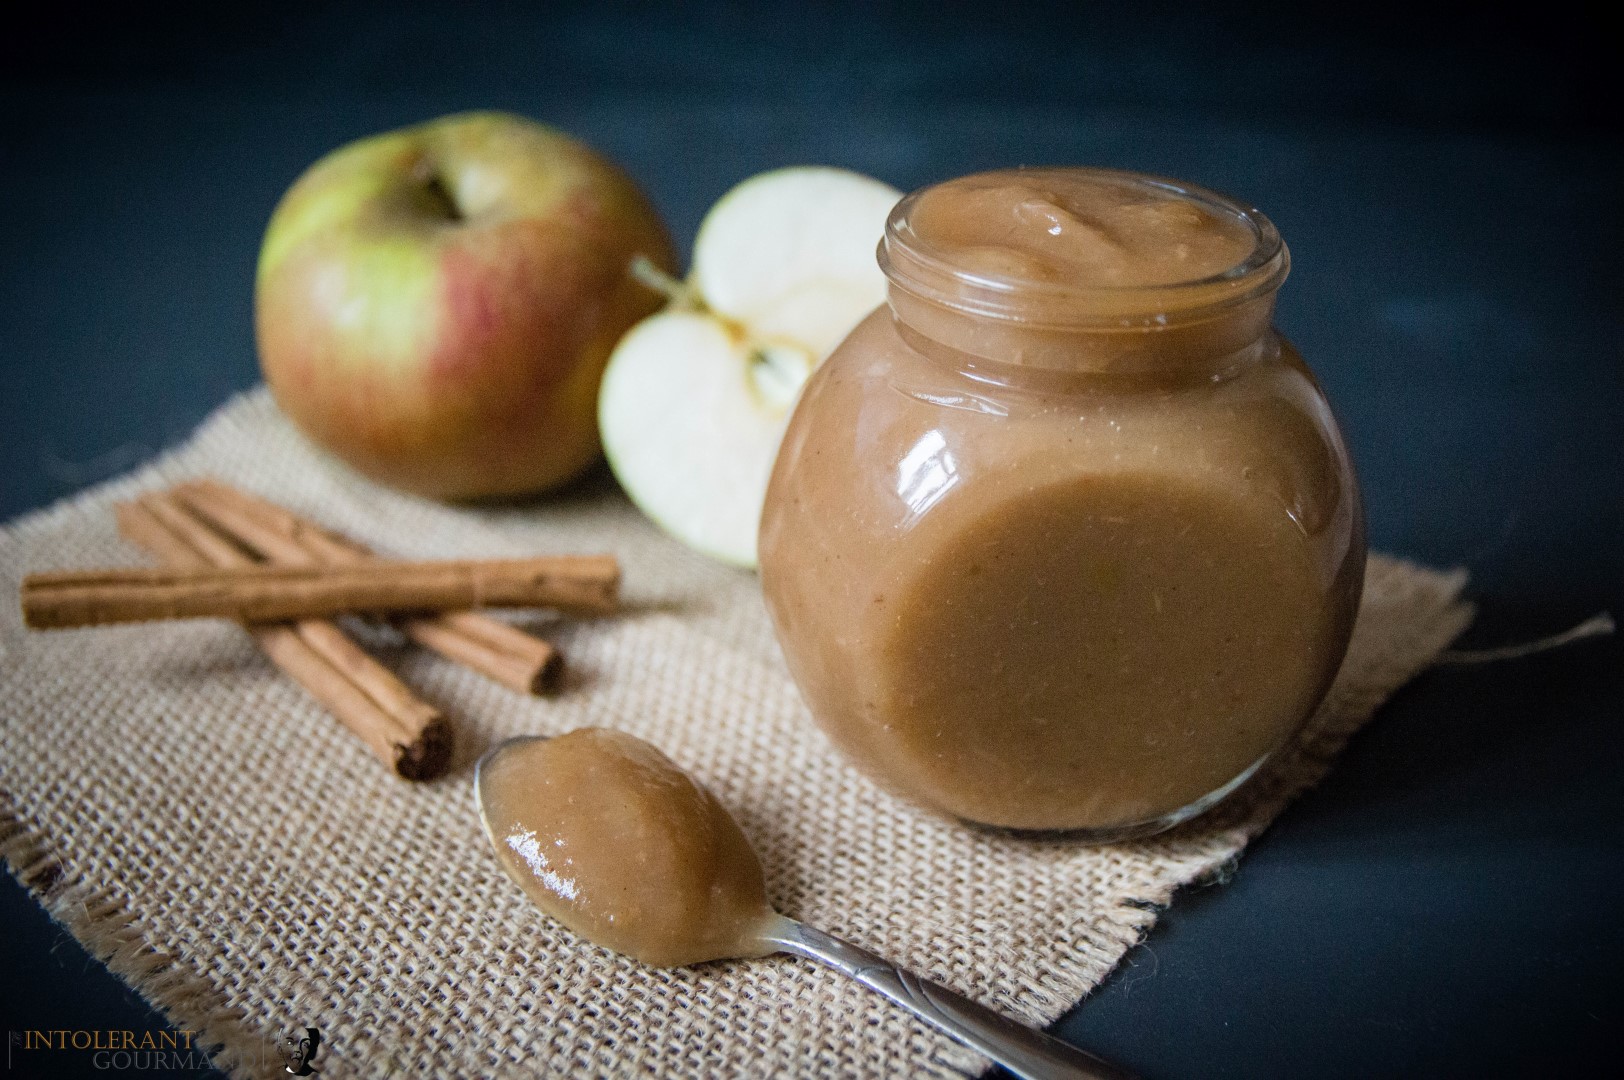 Apple Butter - a delicious and comforting and even better than simple puree! This is dairy-free, gluten-free, nut-free and caters for most allergies, being top 14 allergen free! Perfect on toast, stirred into porridge, used for weaning or in cake! www.intolerantgourmand.com